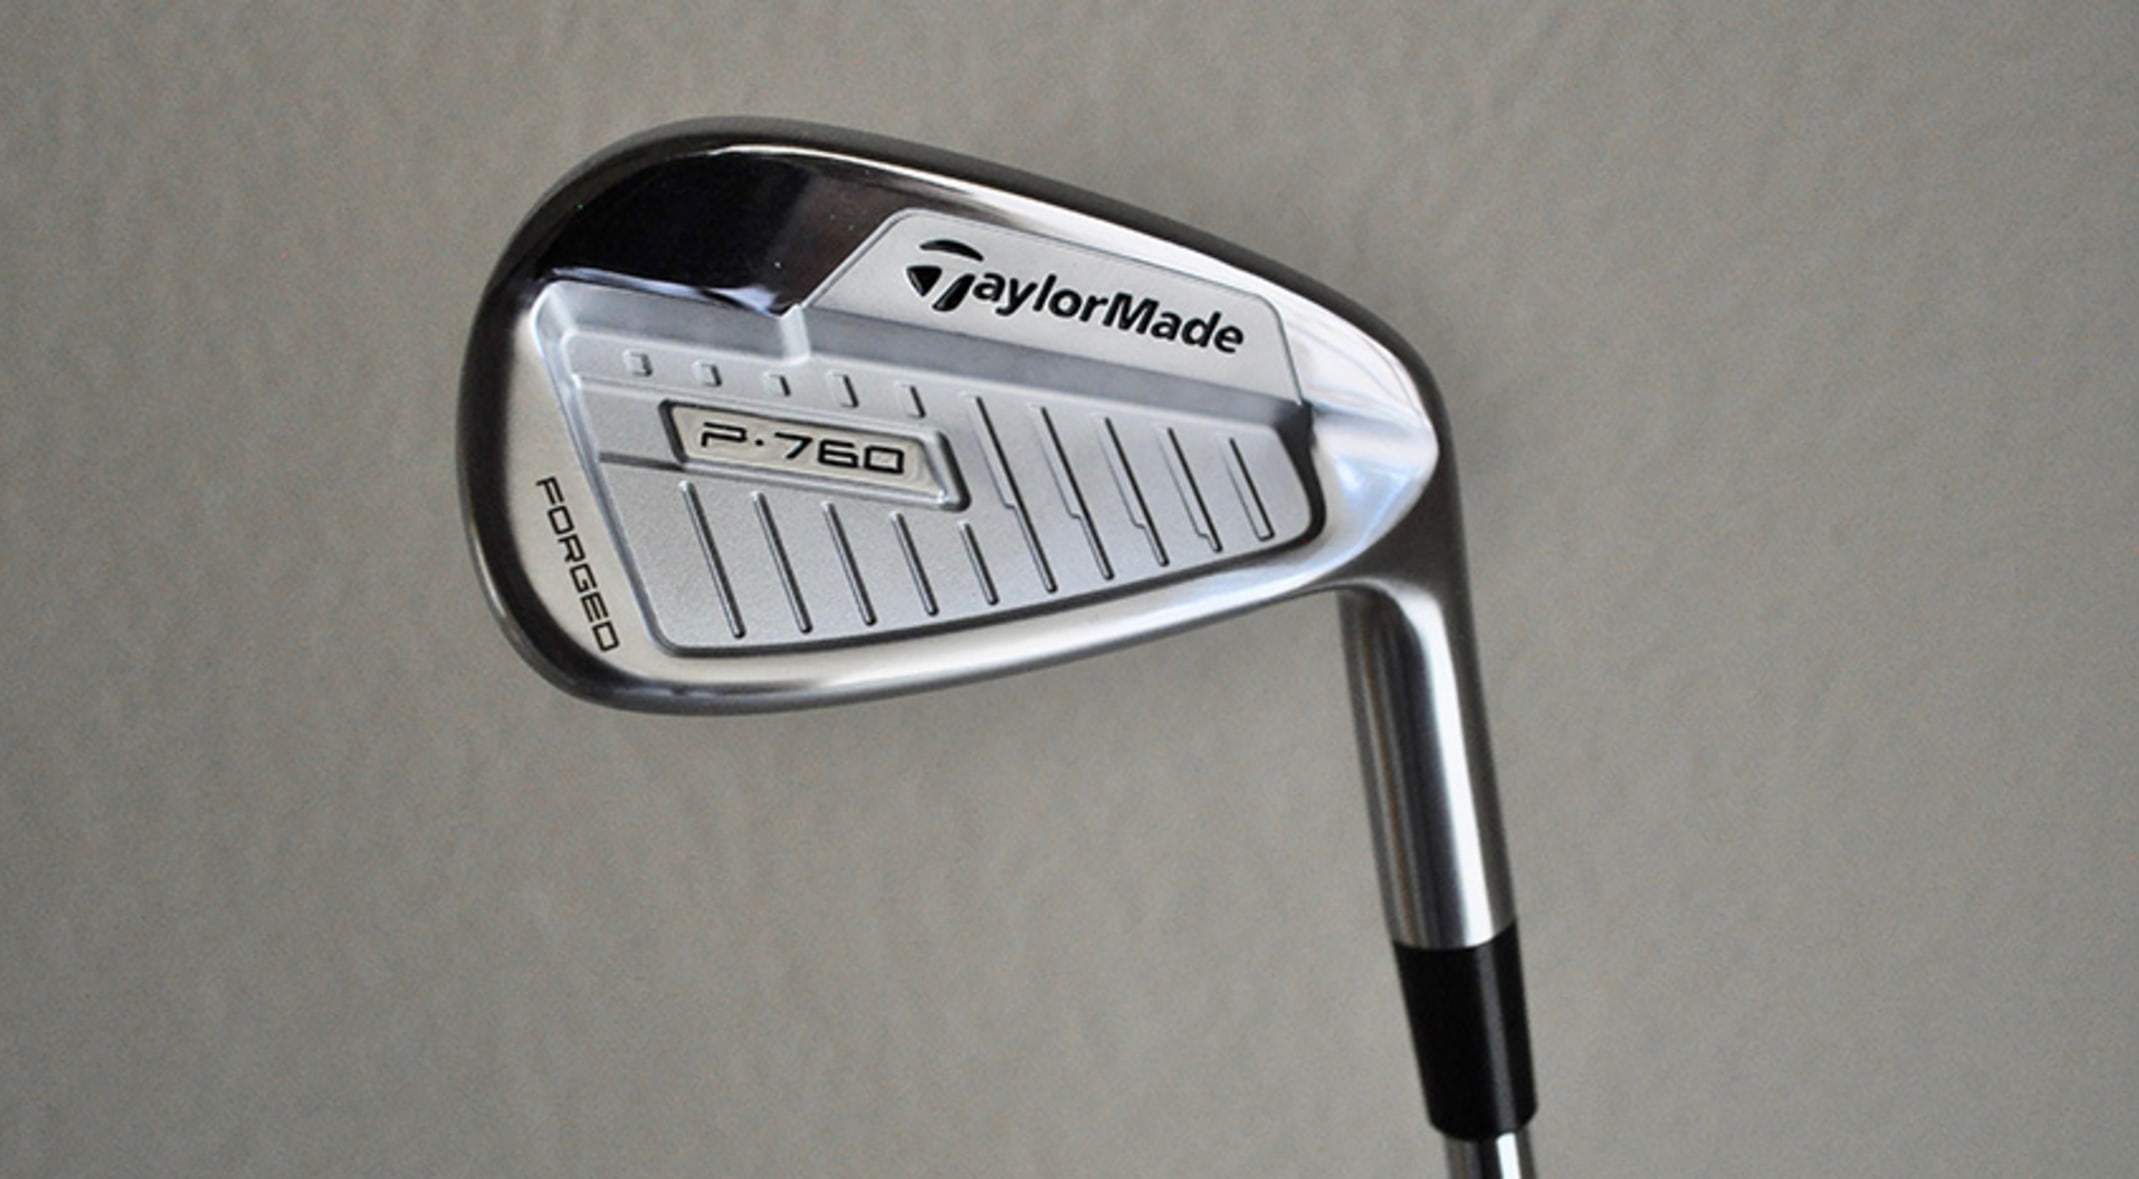 First look: TaylorMade creates progressive forged P760 iron set